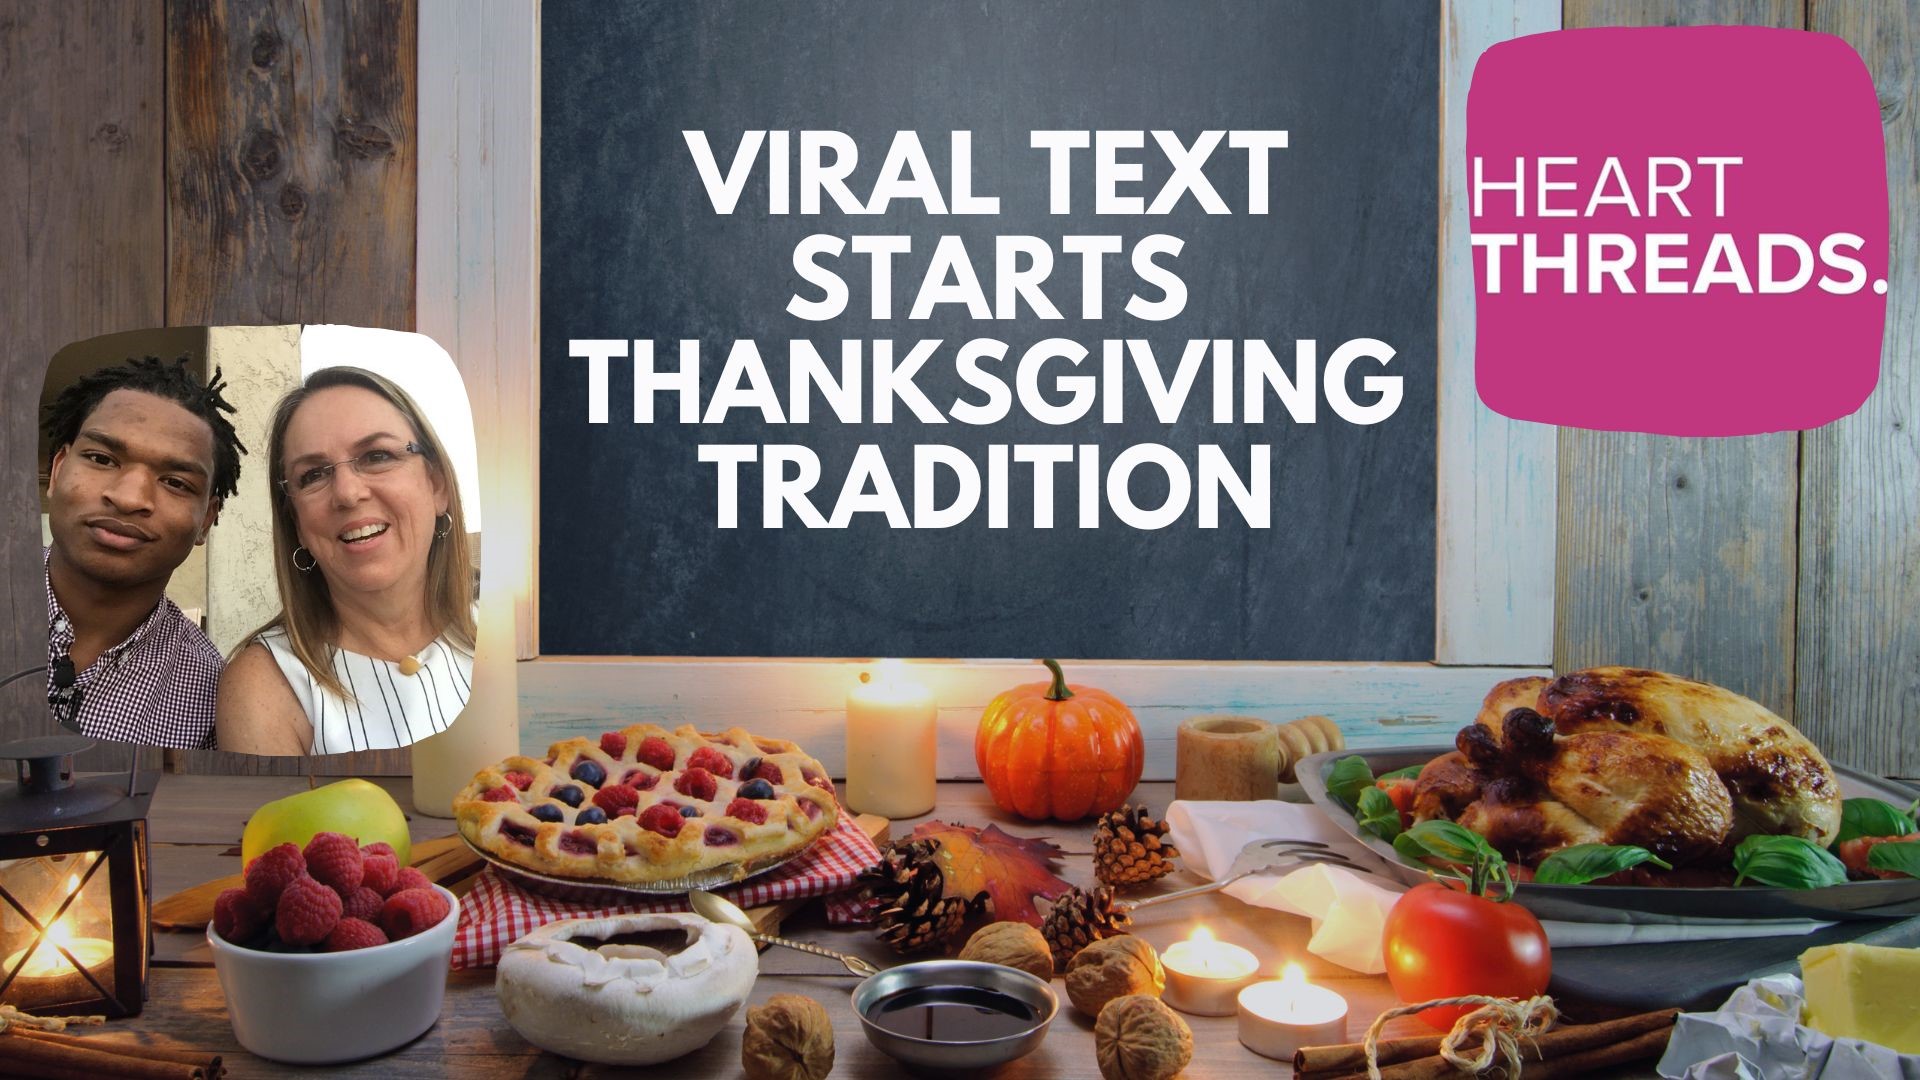 A texting mix-up sparked a Thanksgiving tradition that has been going on since 2016. Jamal Hinton and Wanda Dench are now close friends following the mix-up.